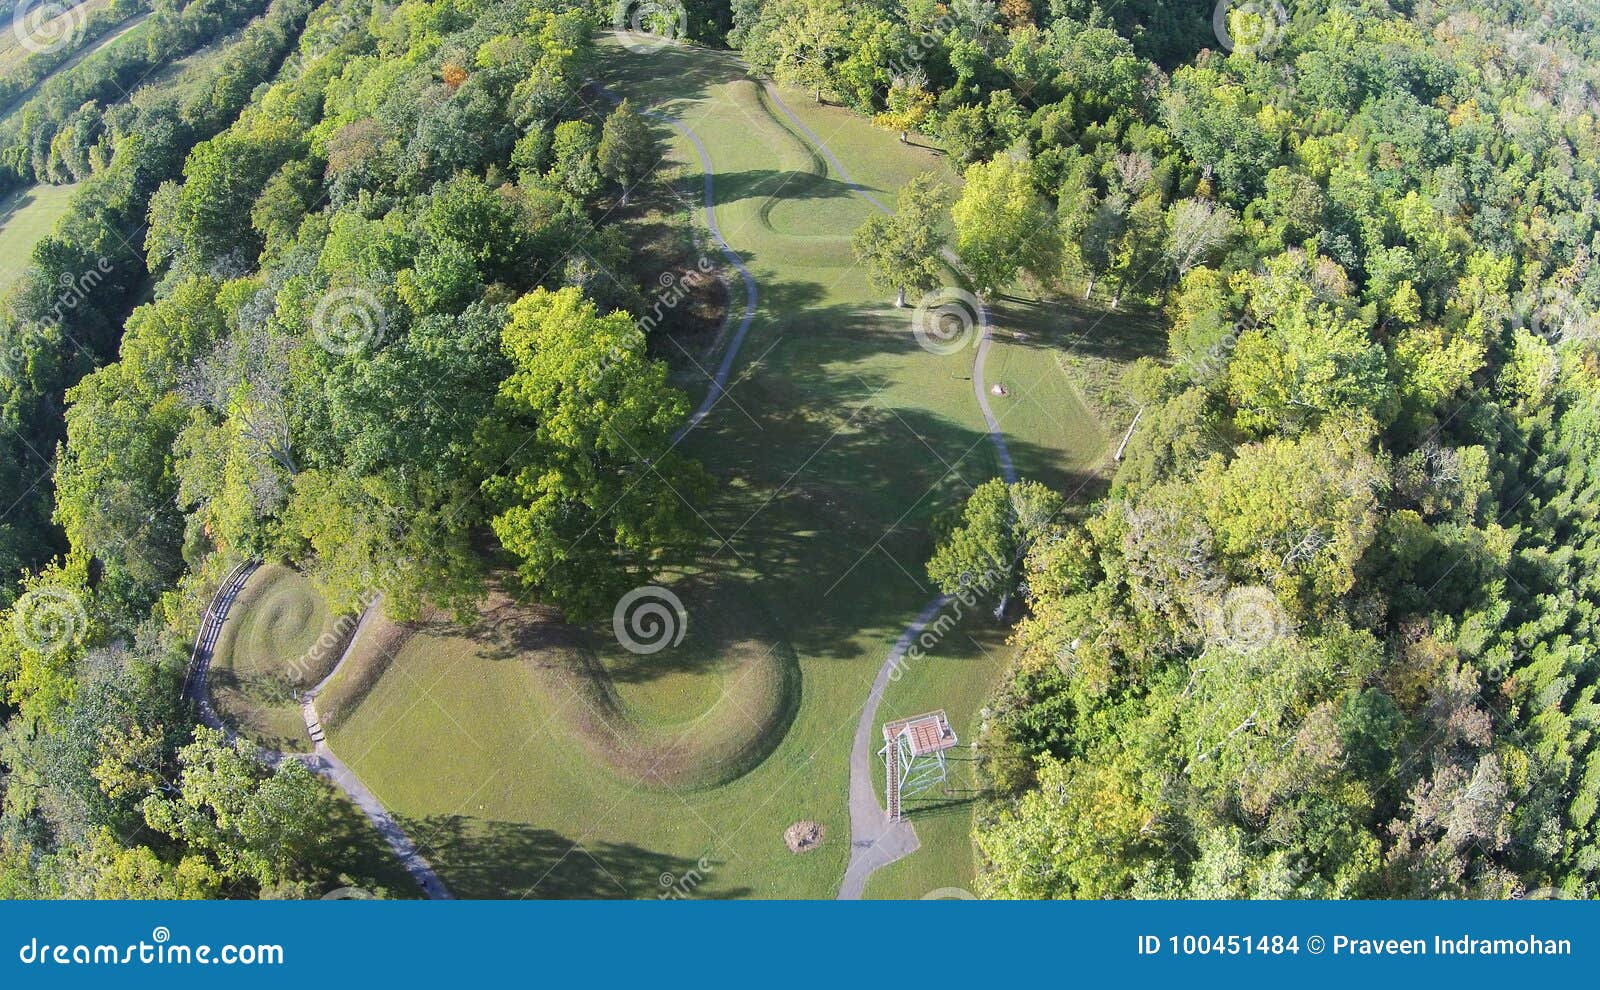 aerial view of the great serpent mound of ohio